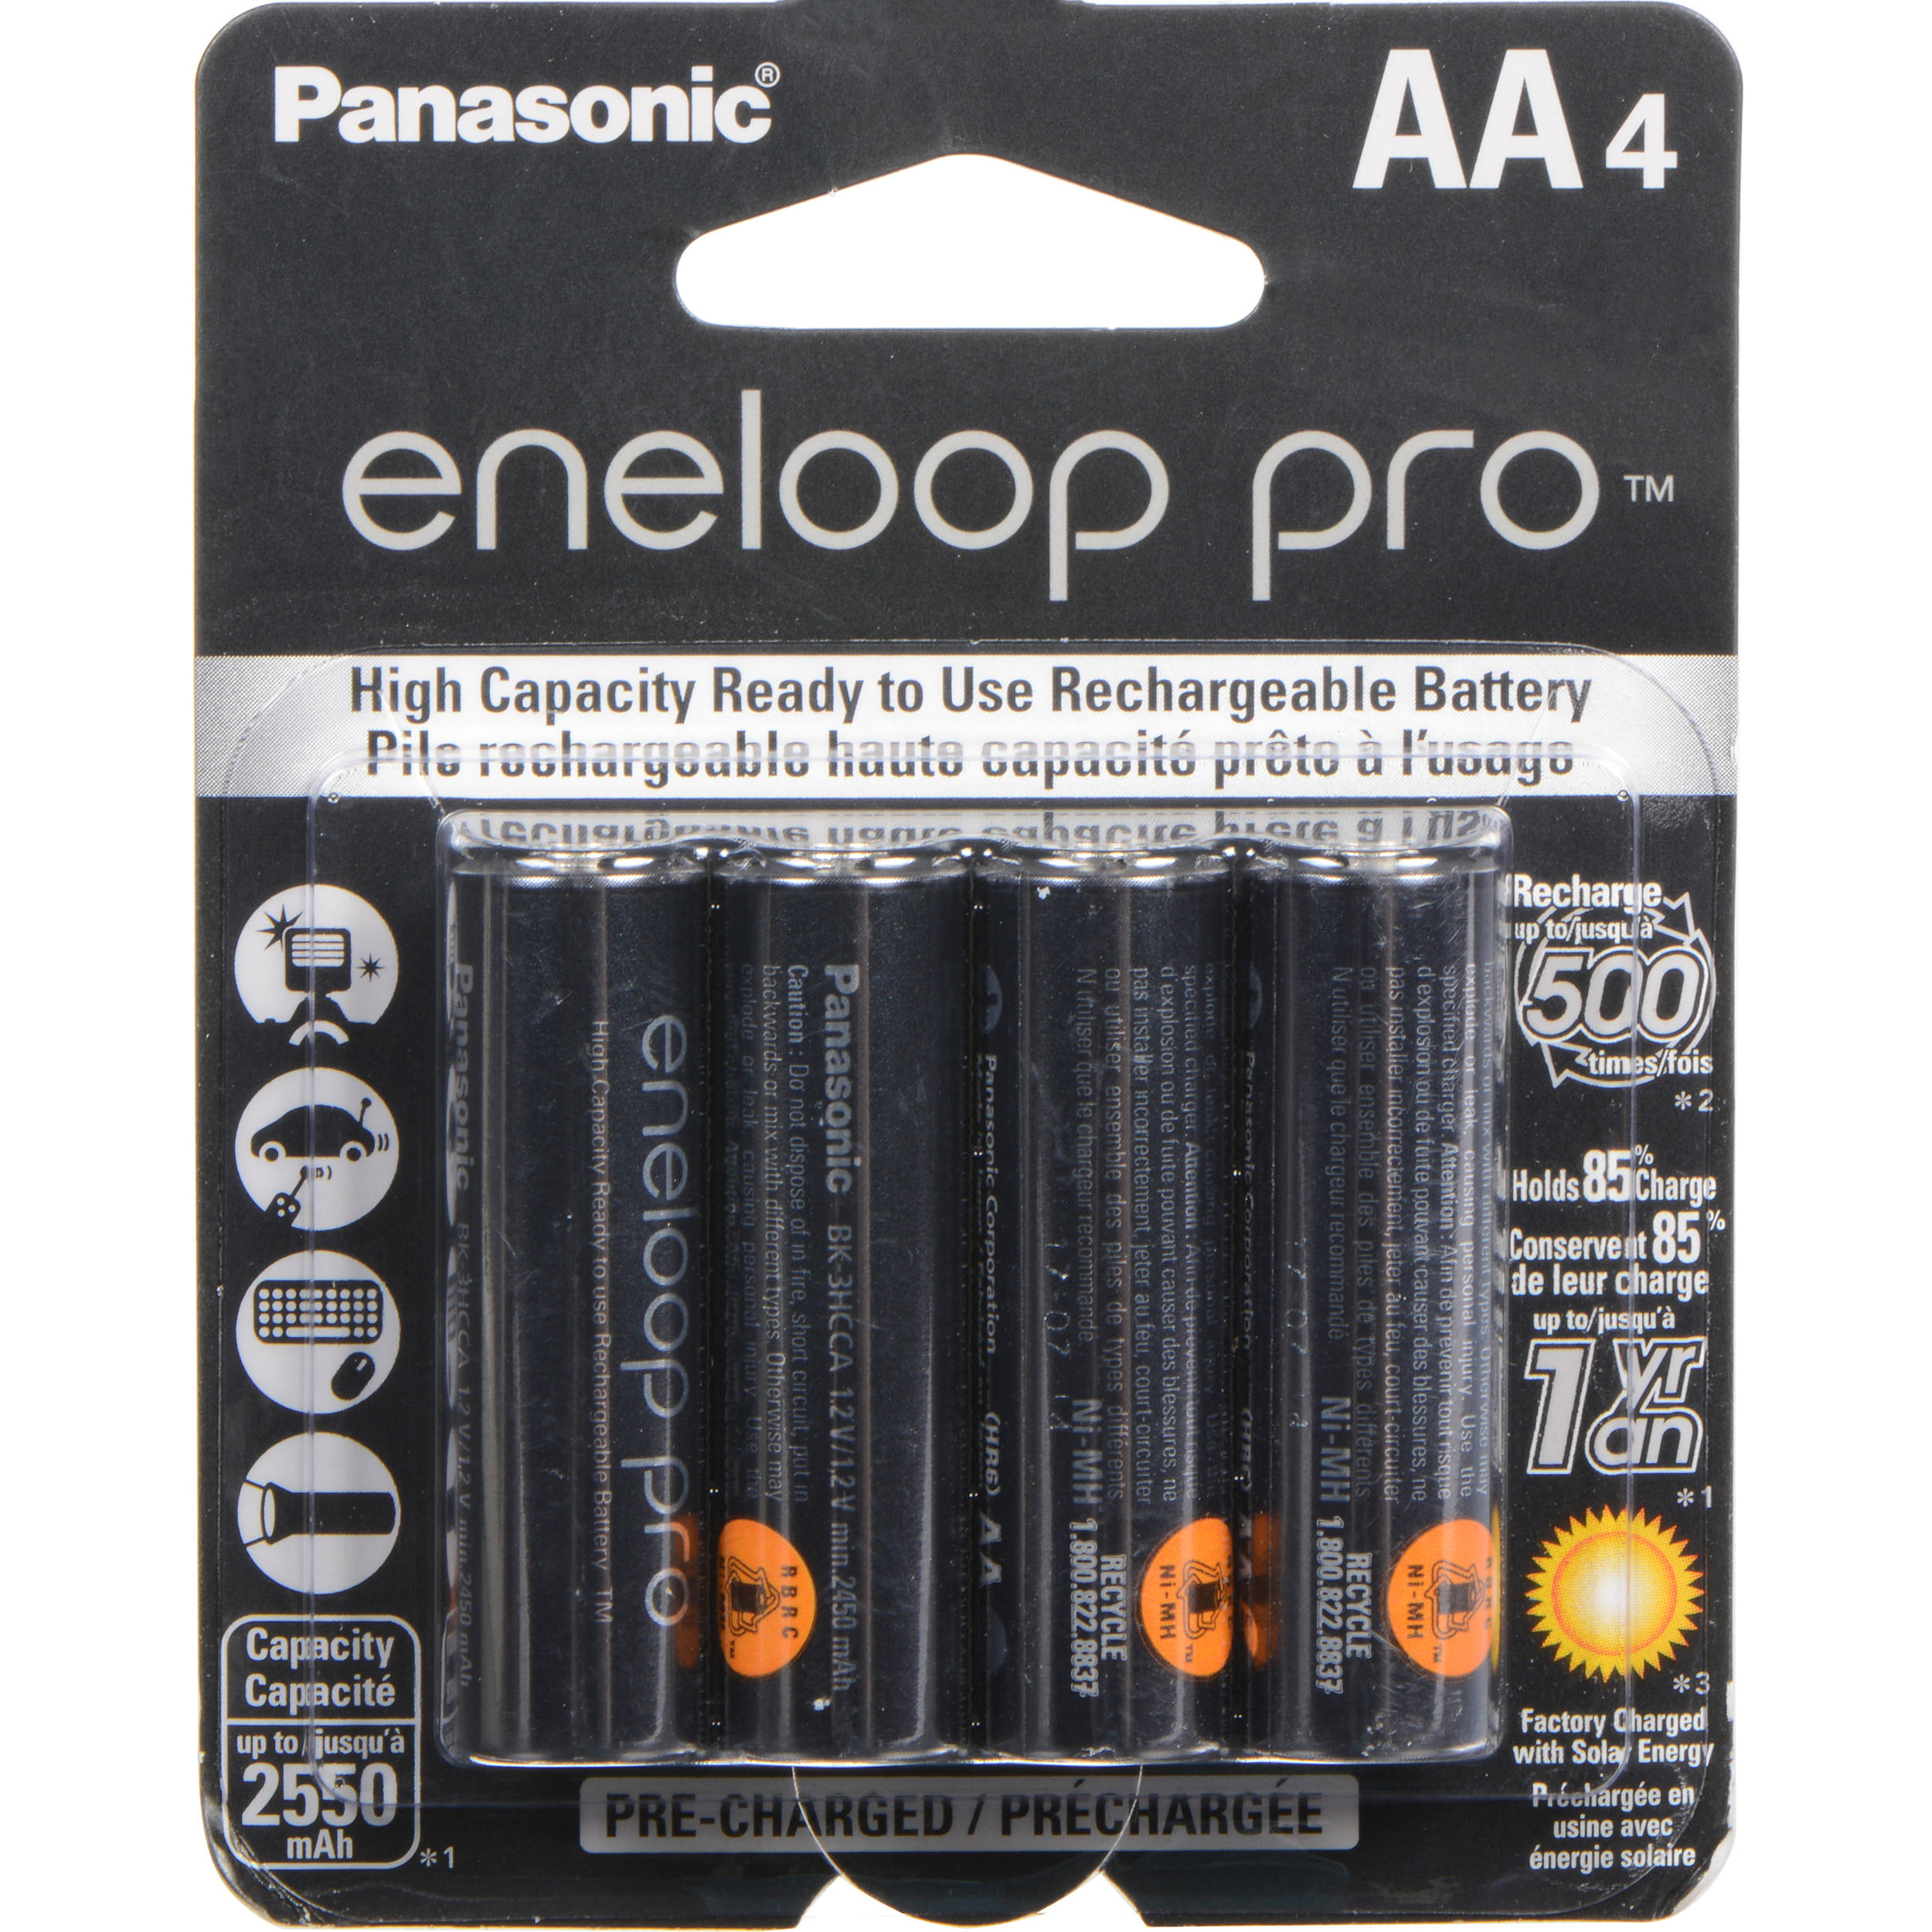 rechargeable batteries offers